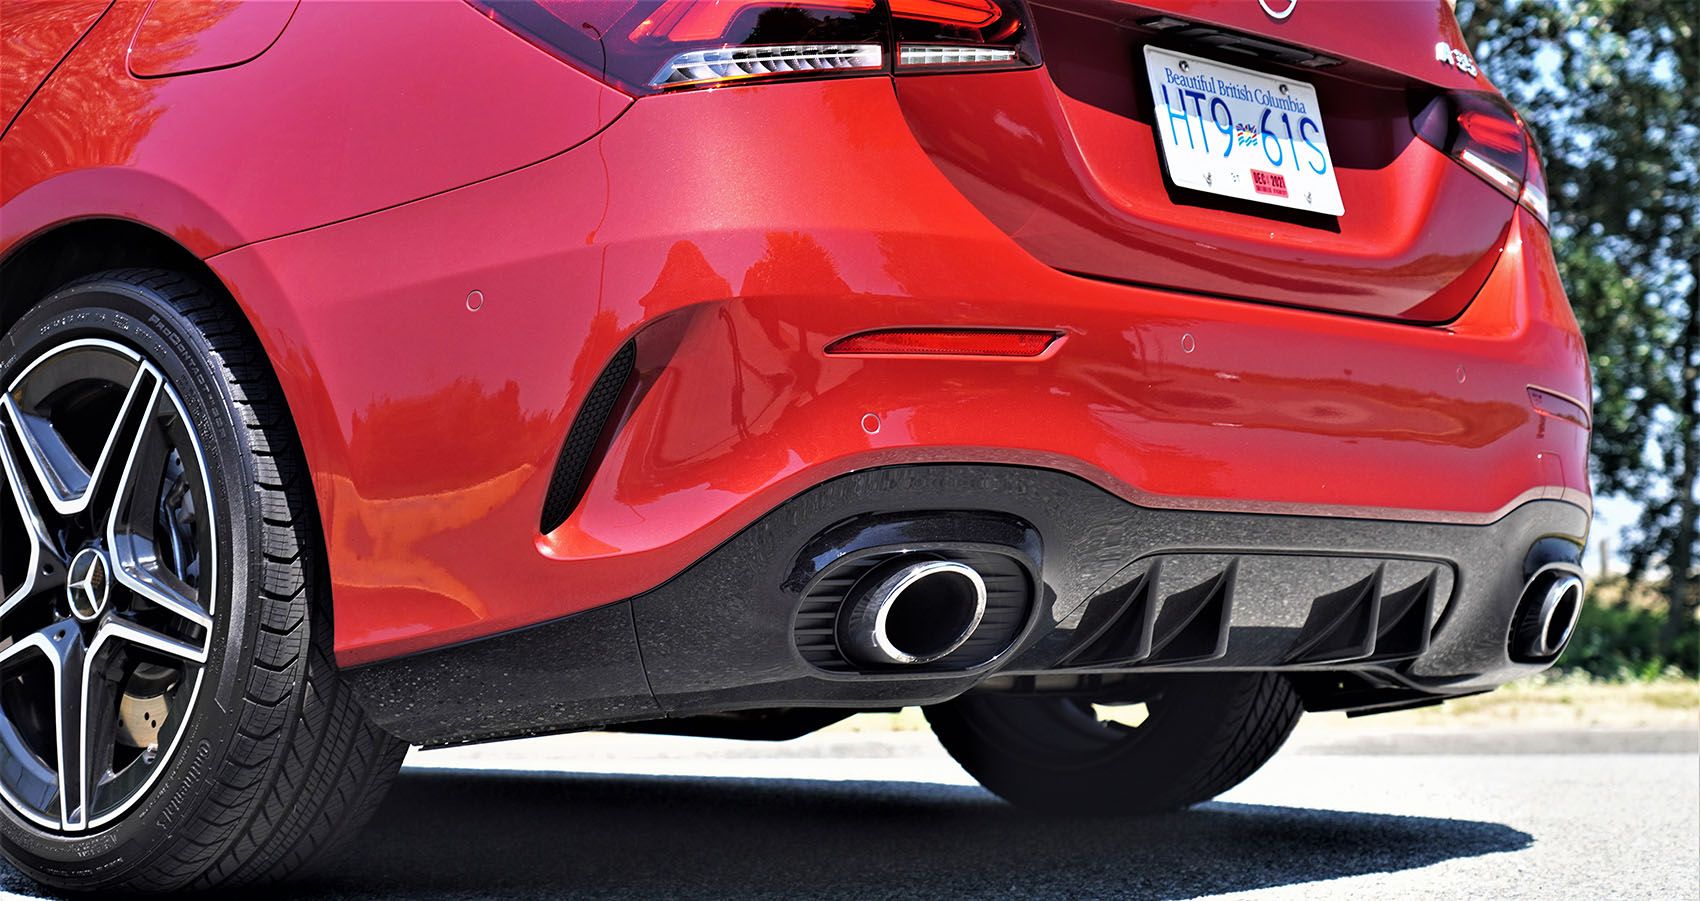 A fabulous sounding sport exhaust and special aerodynamic aids add to the 2021 Mercedes-AMG A35 4Matic Sedan's performance.